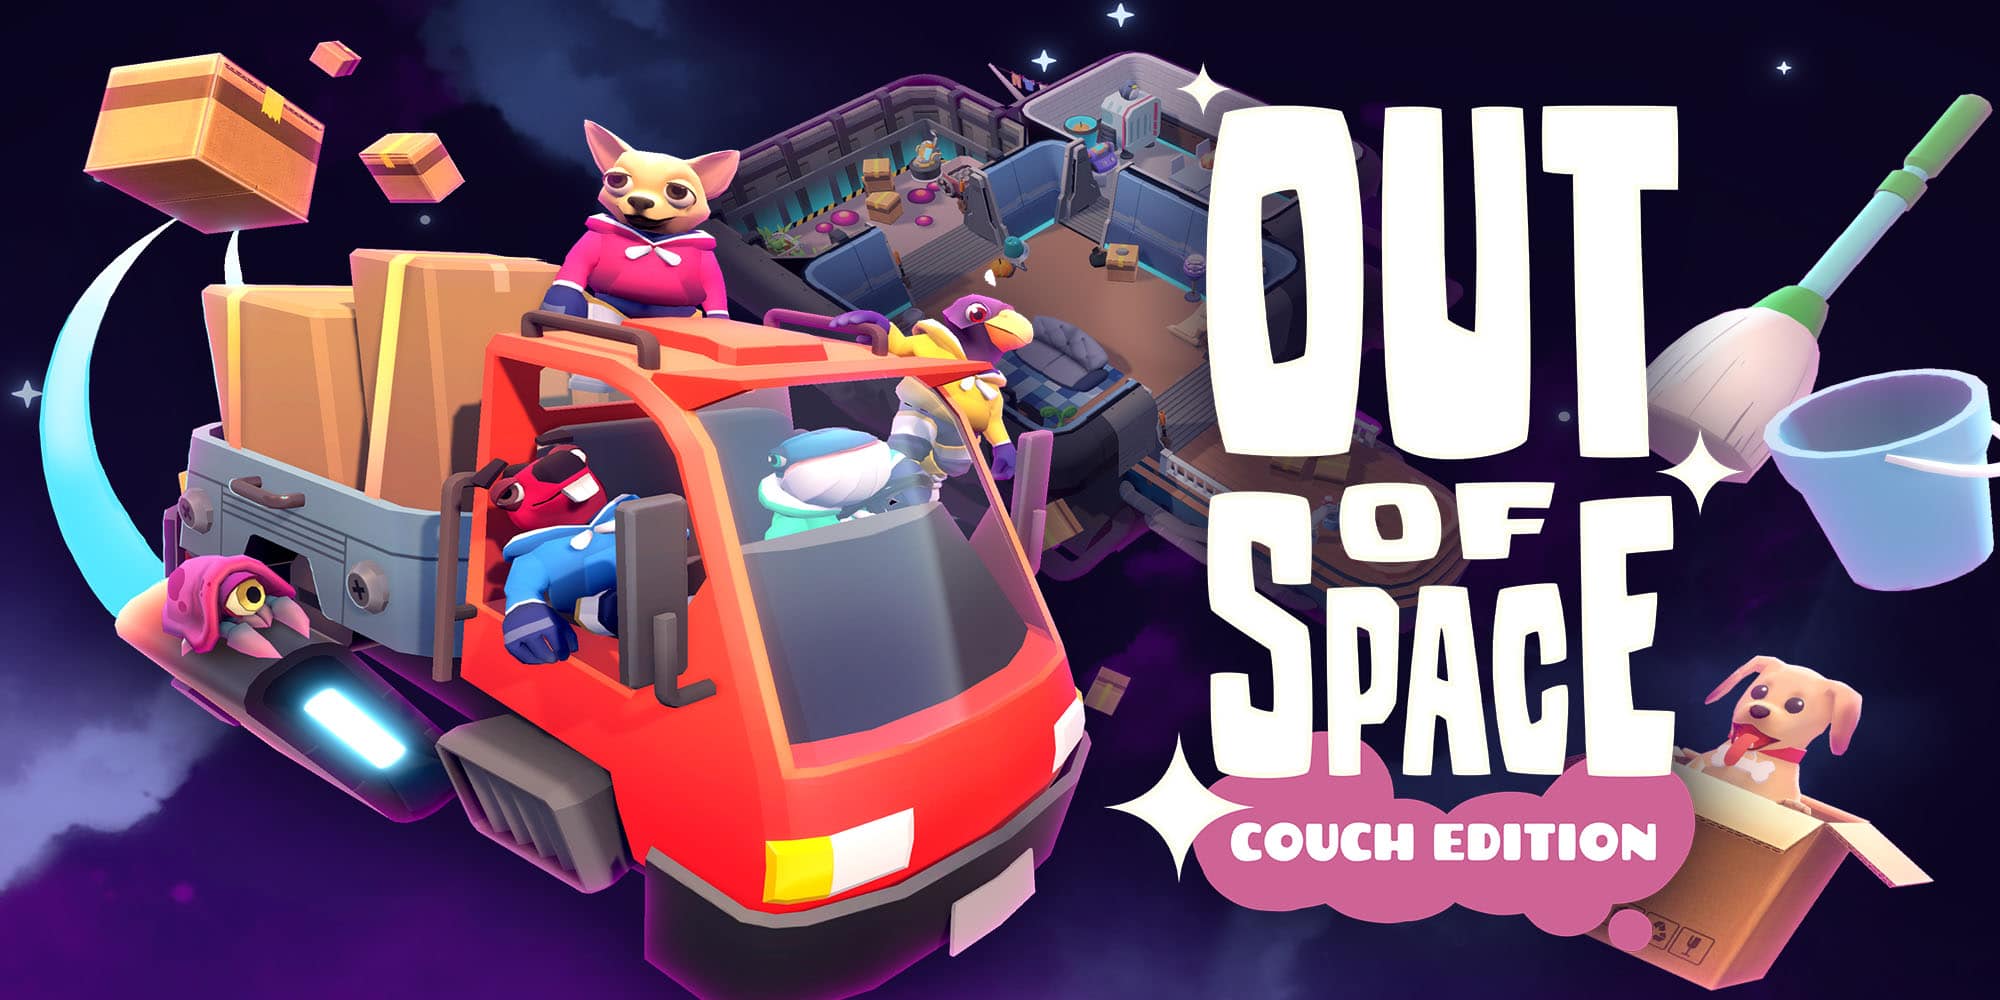 Out of Space: Couch Edition, la recensione per PlayStation 4 2